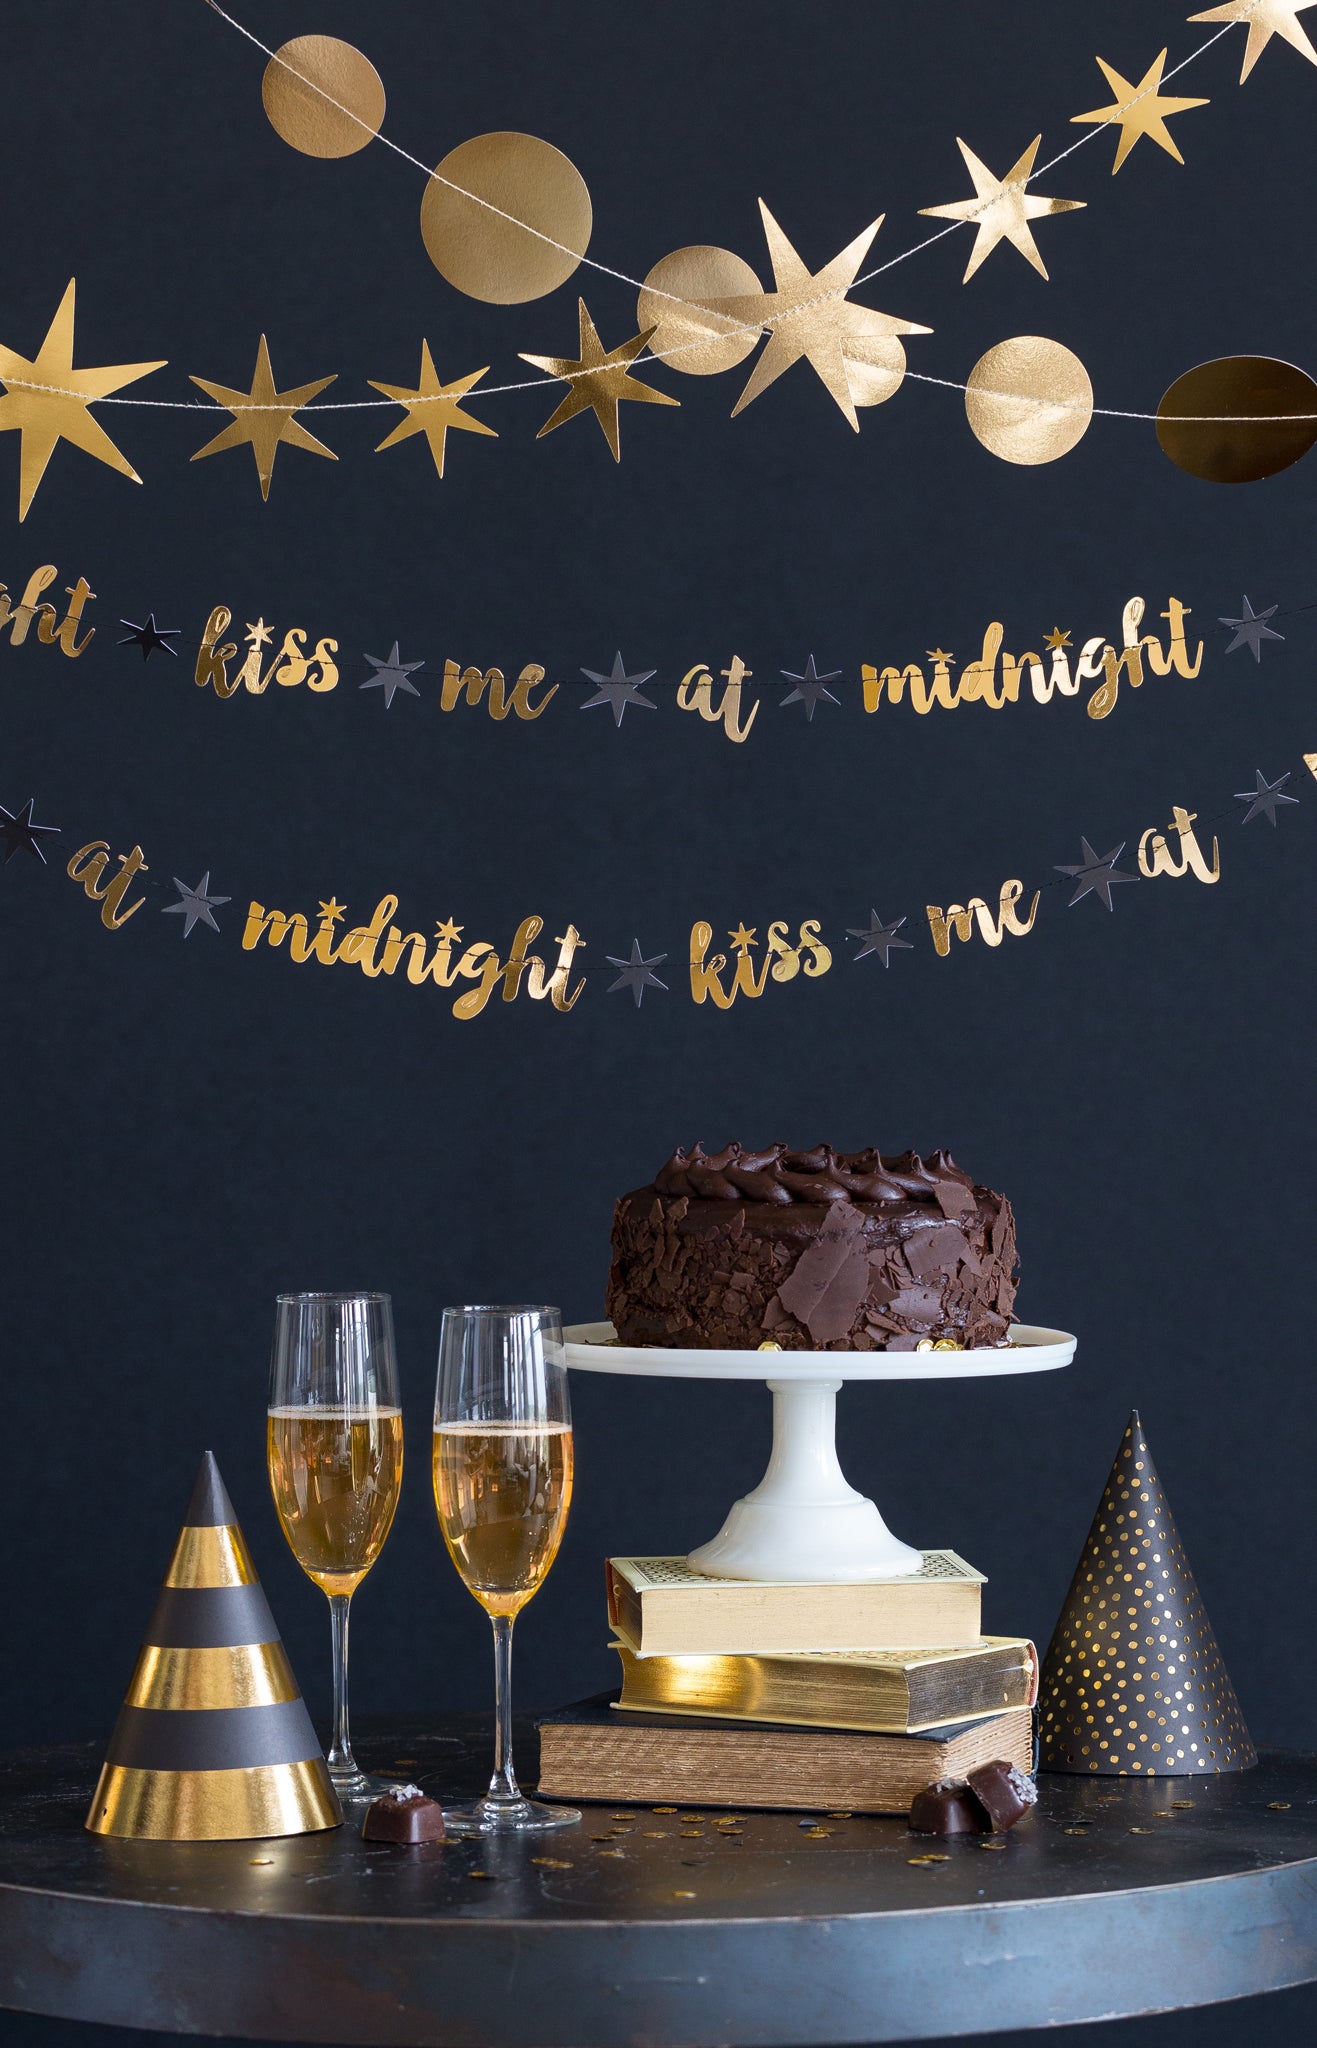 New Year's Eve "Kiss Me at Midnight" Banner